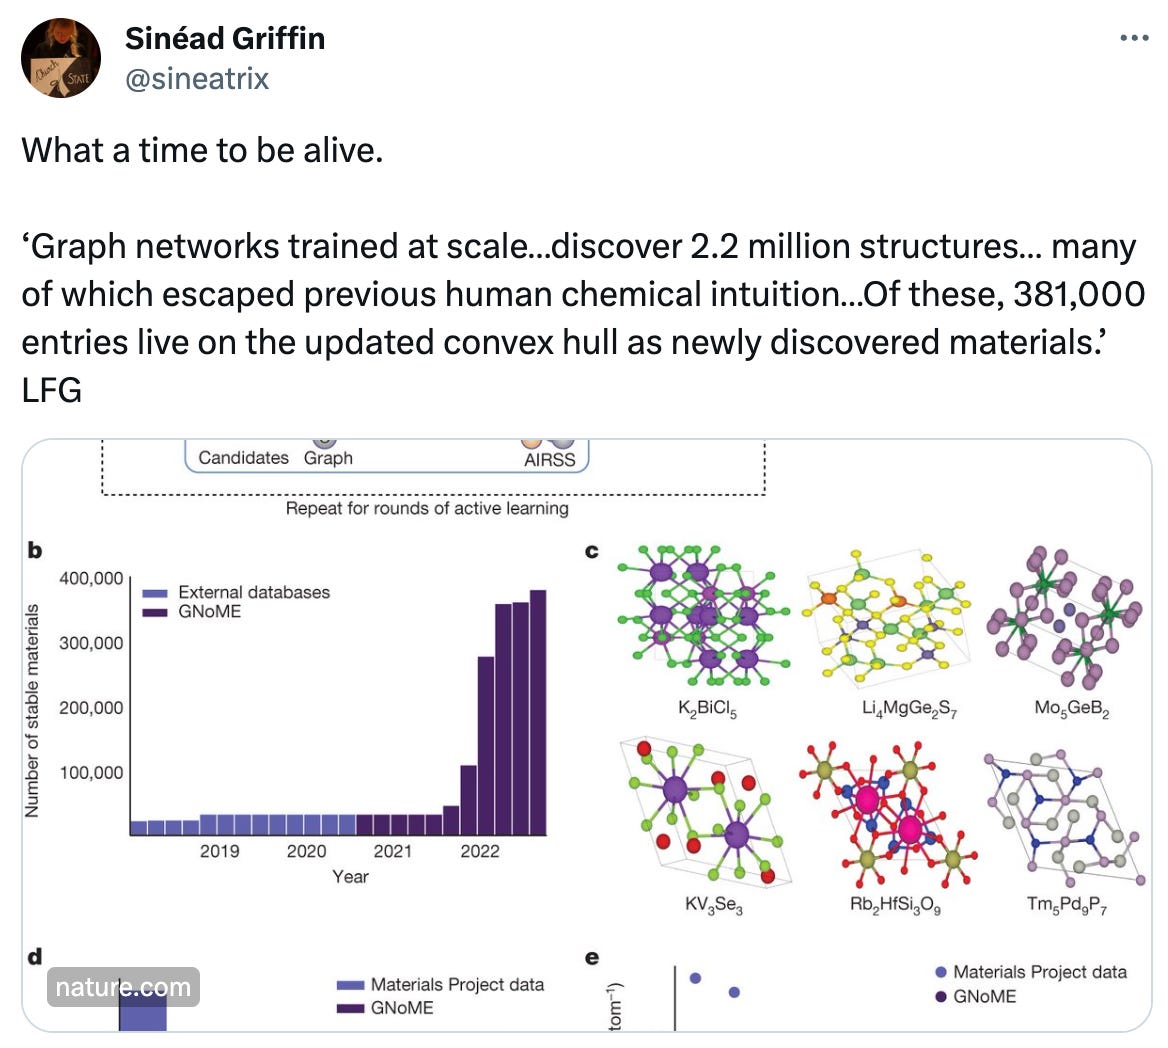  See new posts Conversation Sinéad Griffin @sineatrix What a time to be alive.  ‘Graph networks trained at scale…discover 2.2 million structures… many of which escaped previous human chemical intuition…Of these, 381,000 entries live on the updated convex hull as newly discovered materials.’ LFG